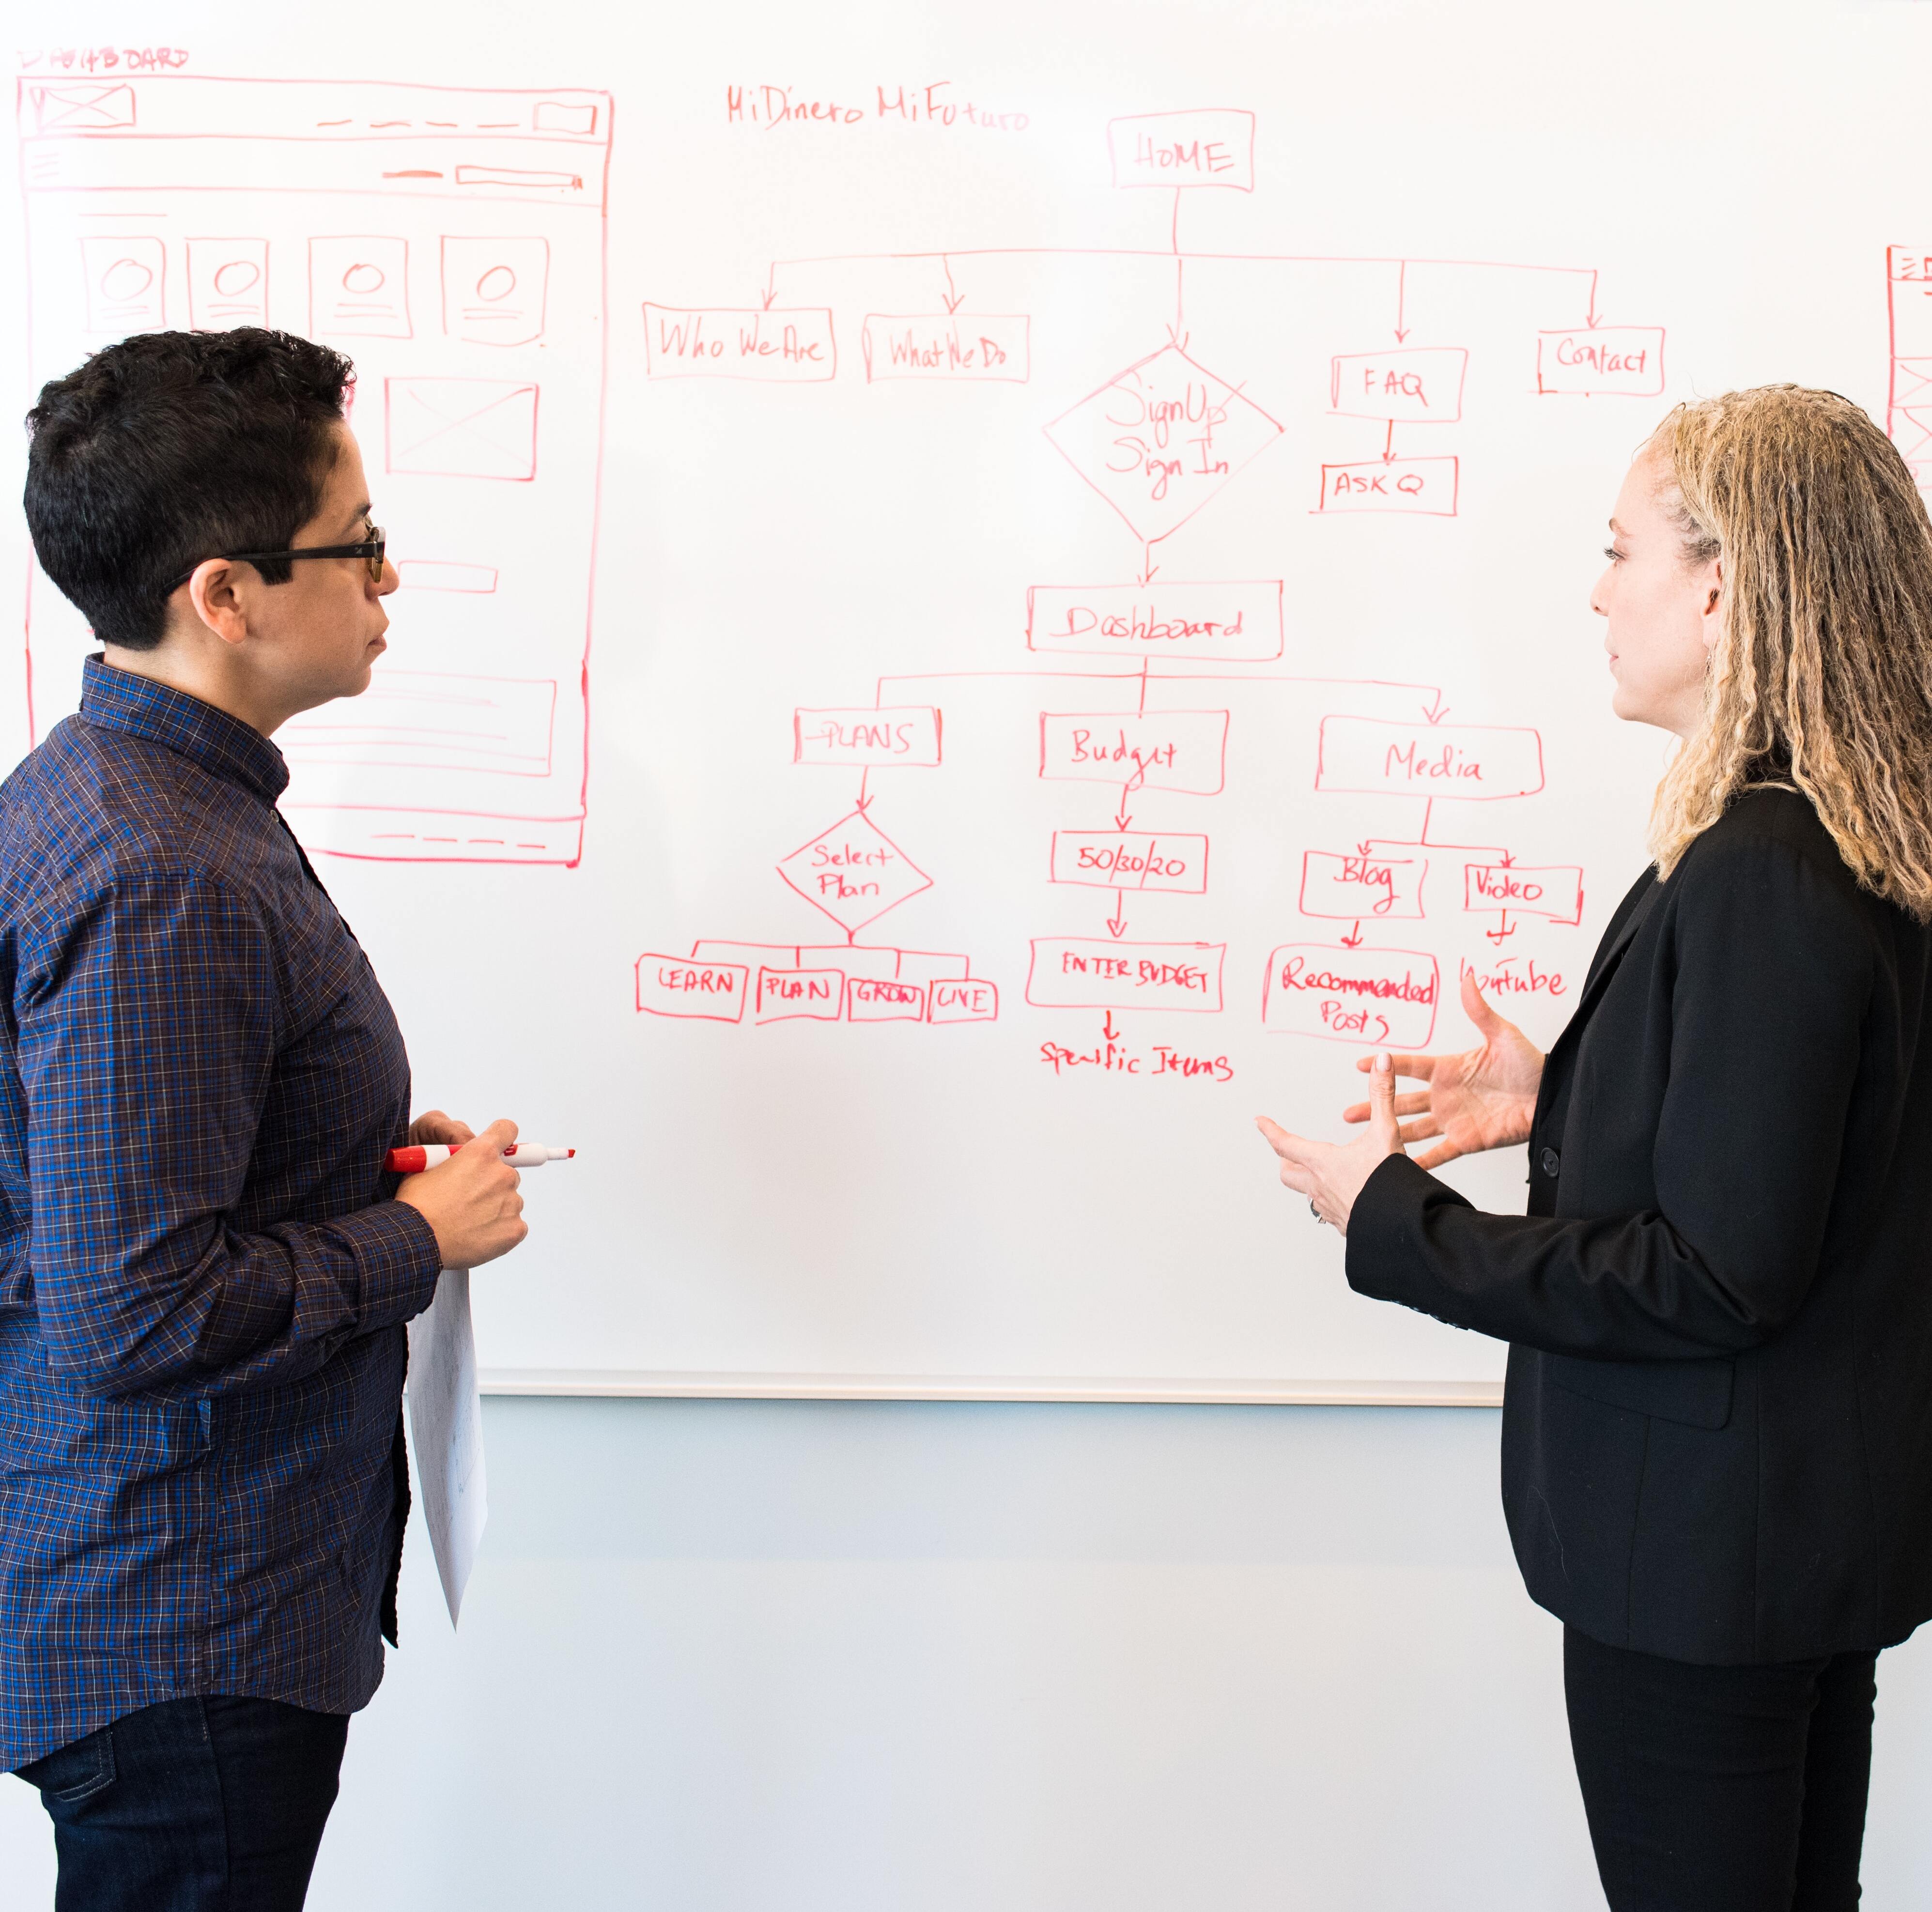 two people are discussing in front of a white board with diagrams